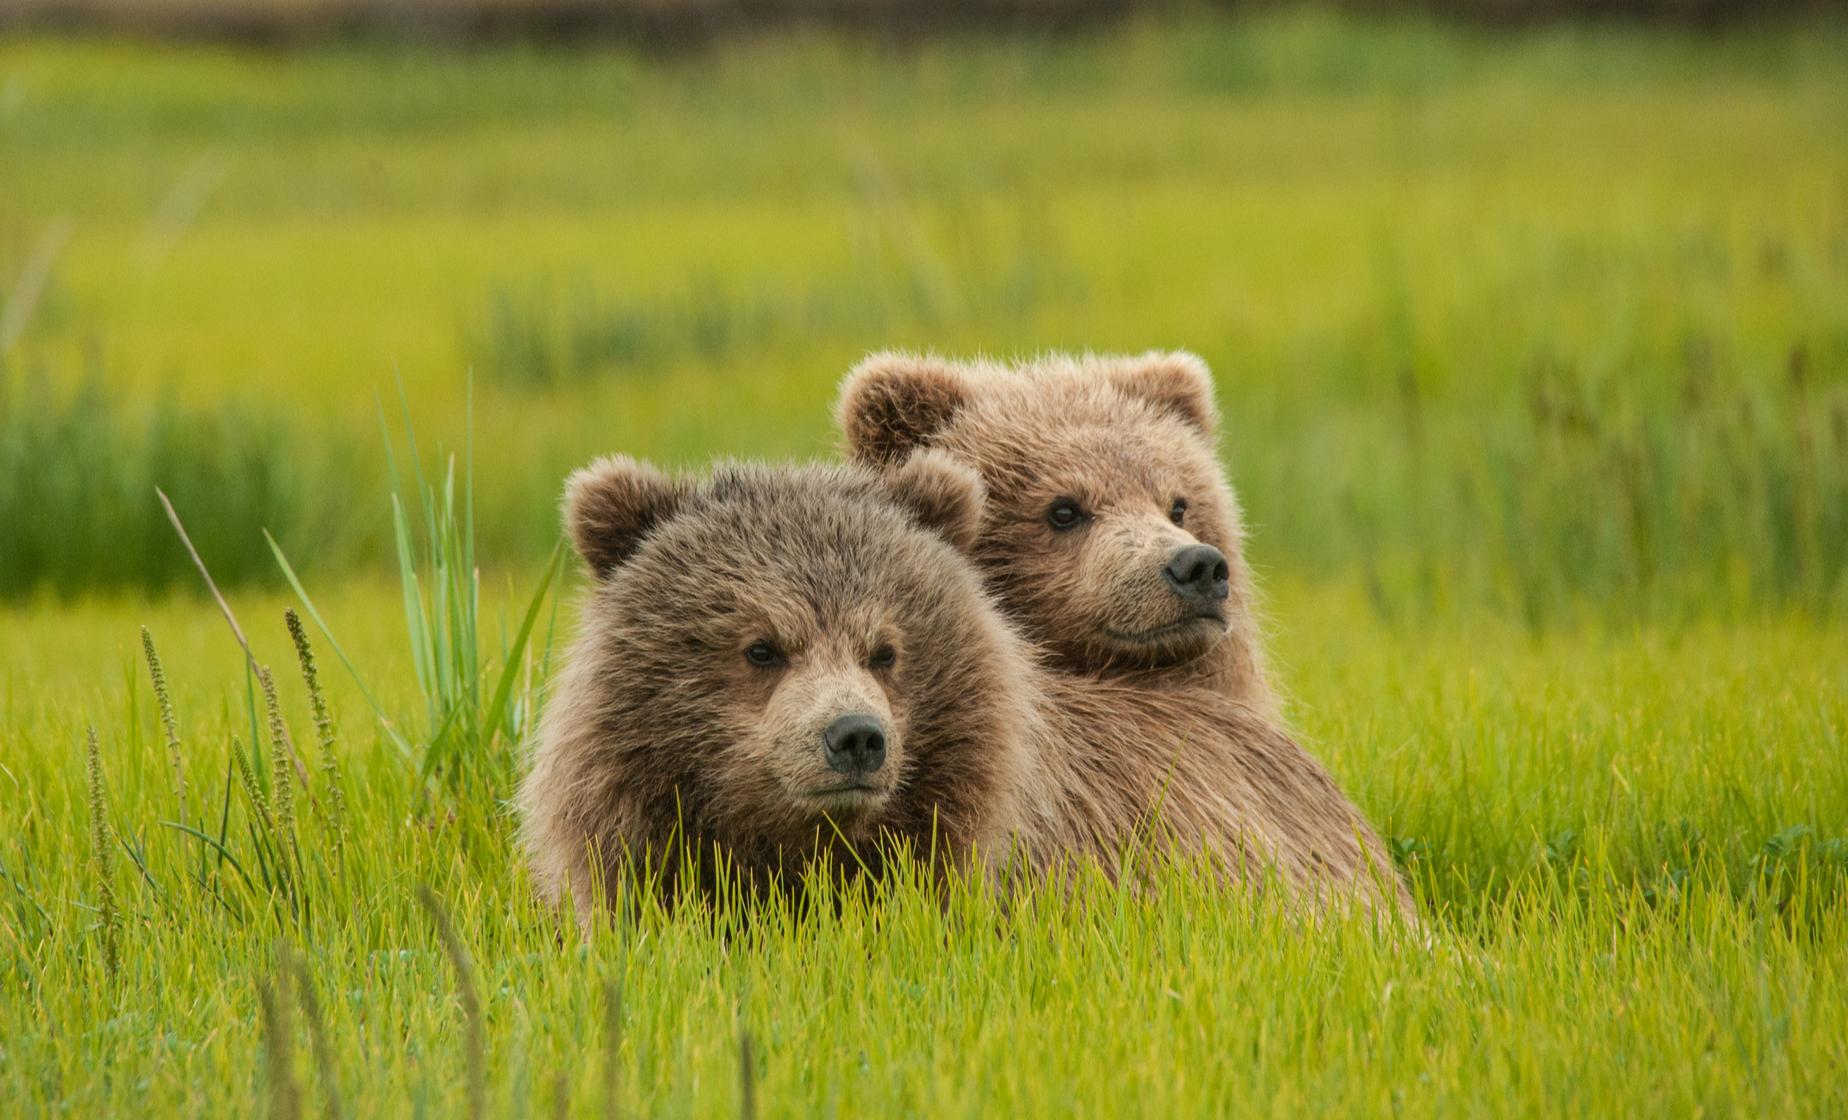 Icy Strait Cruise Excursions | Bear, Wilderness & Wildlife Search